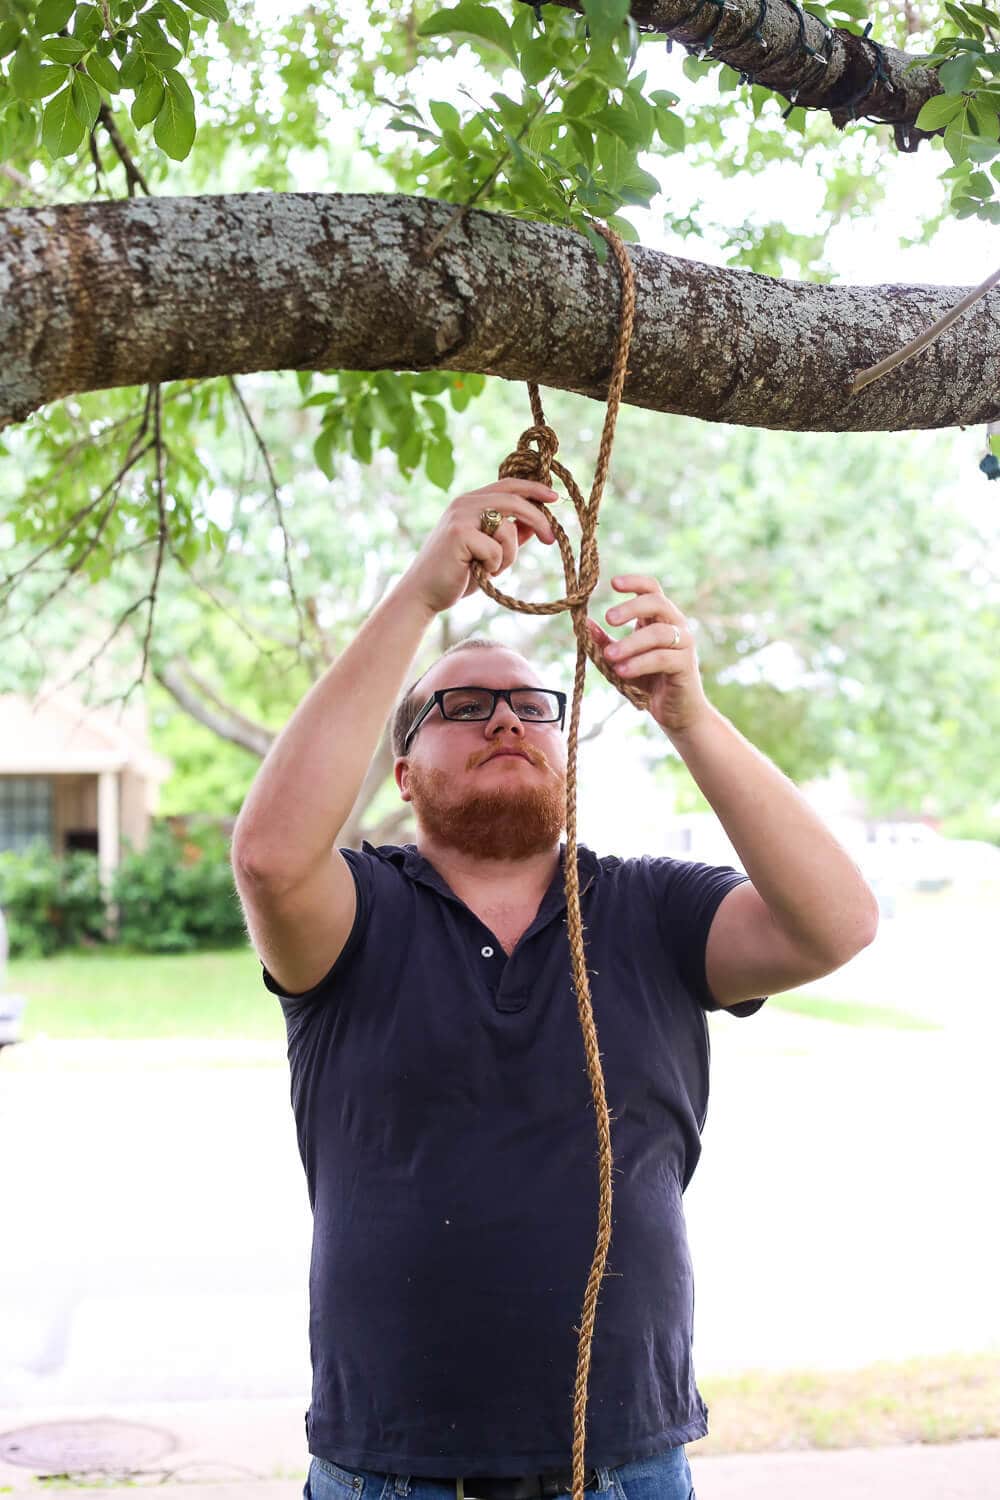 How to attach tree swing to branch